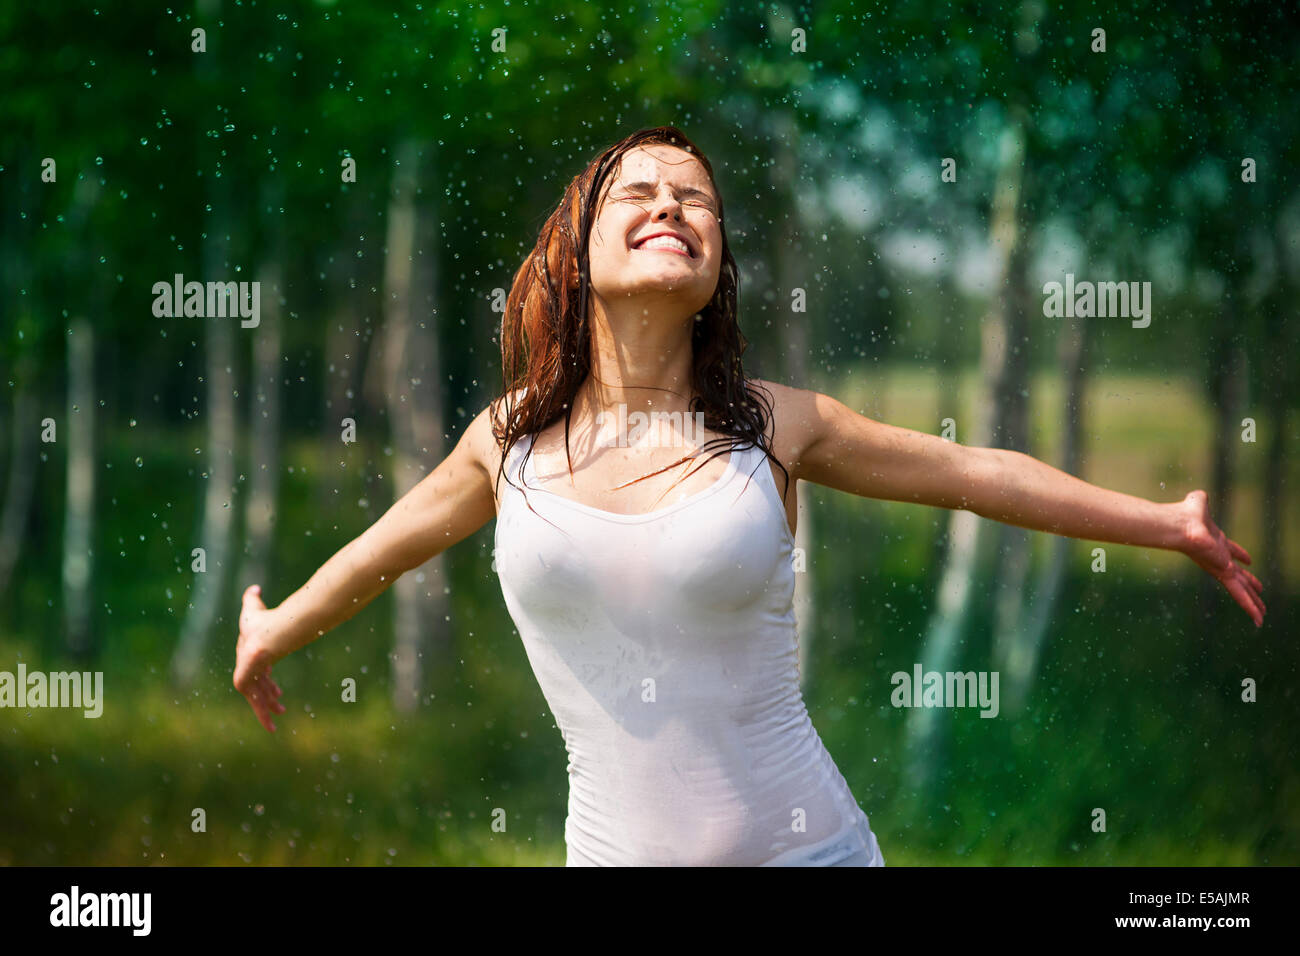 Happy young woman enjoying in nature, Debica, Poland. Stock Photo